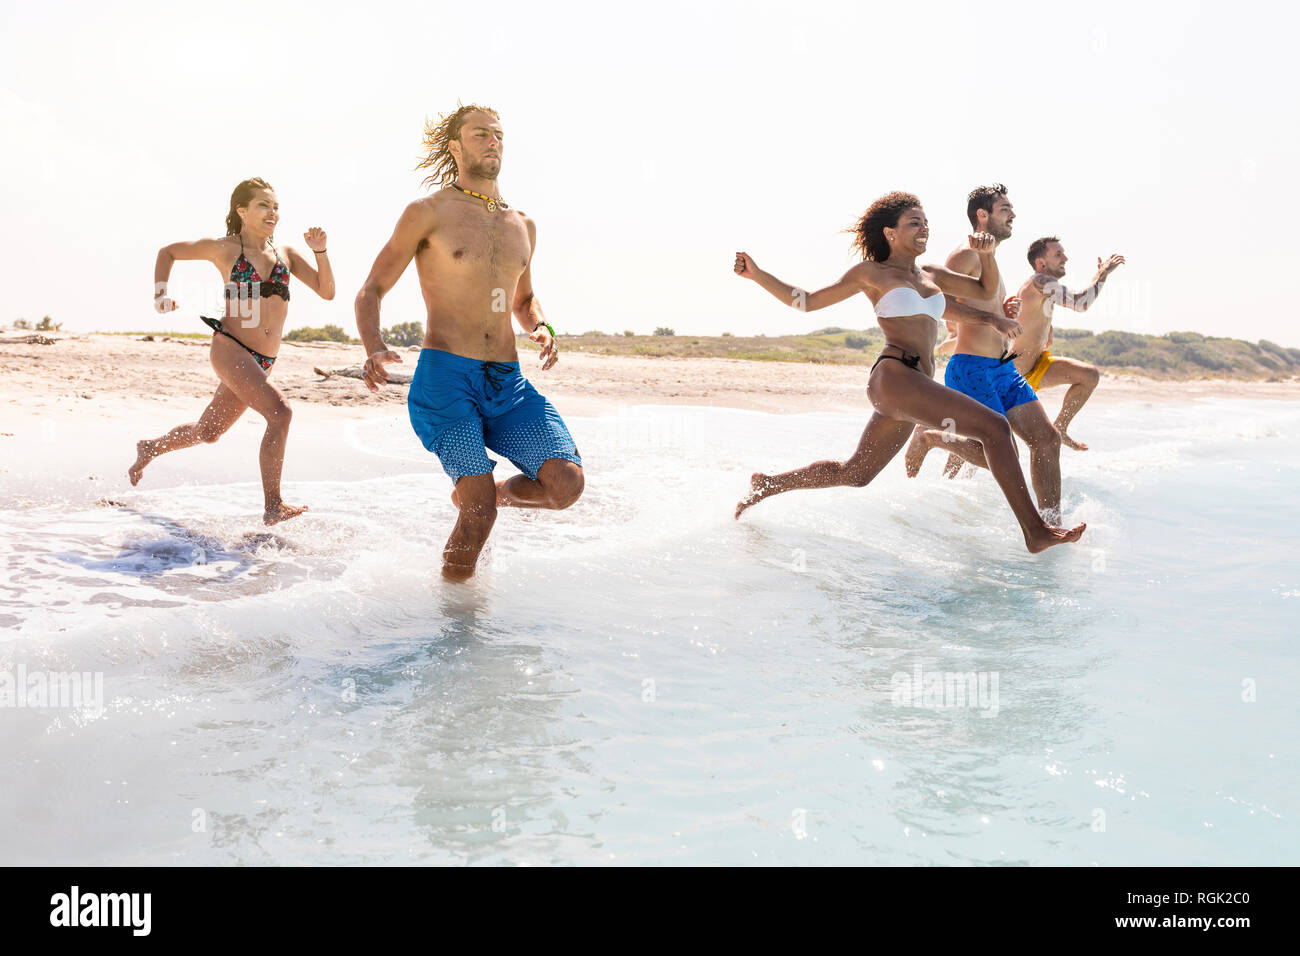 Group of friends having fun on the beach, running into the water Stock Photo